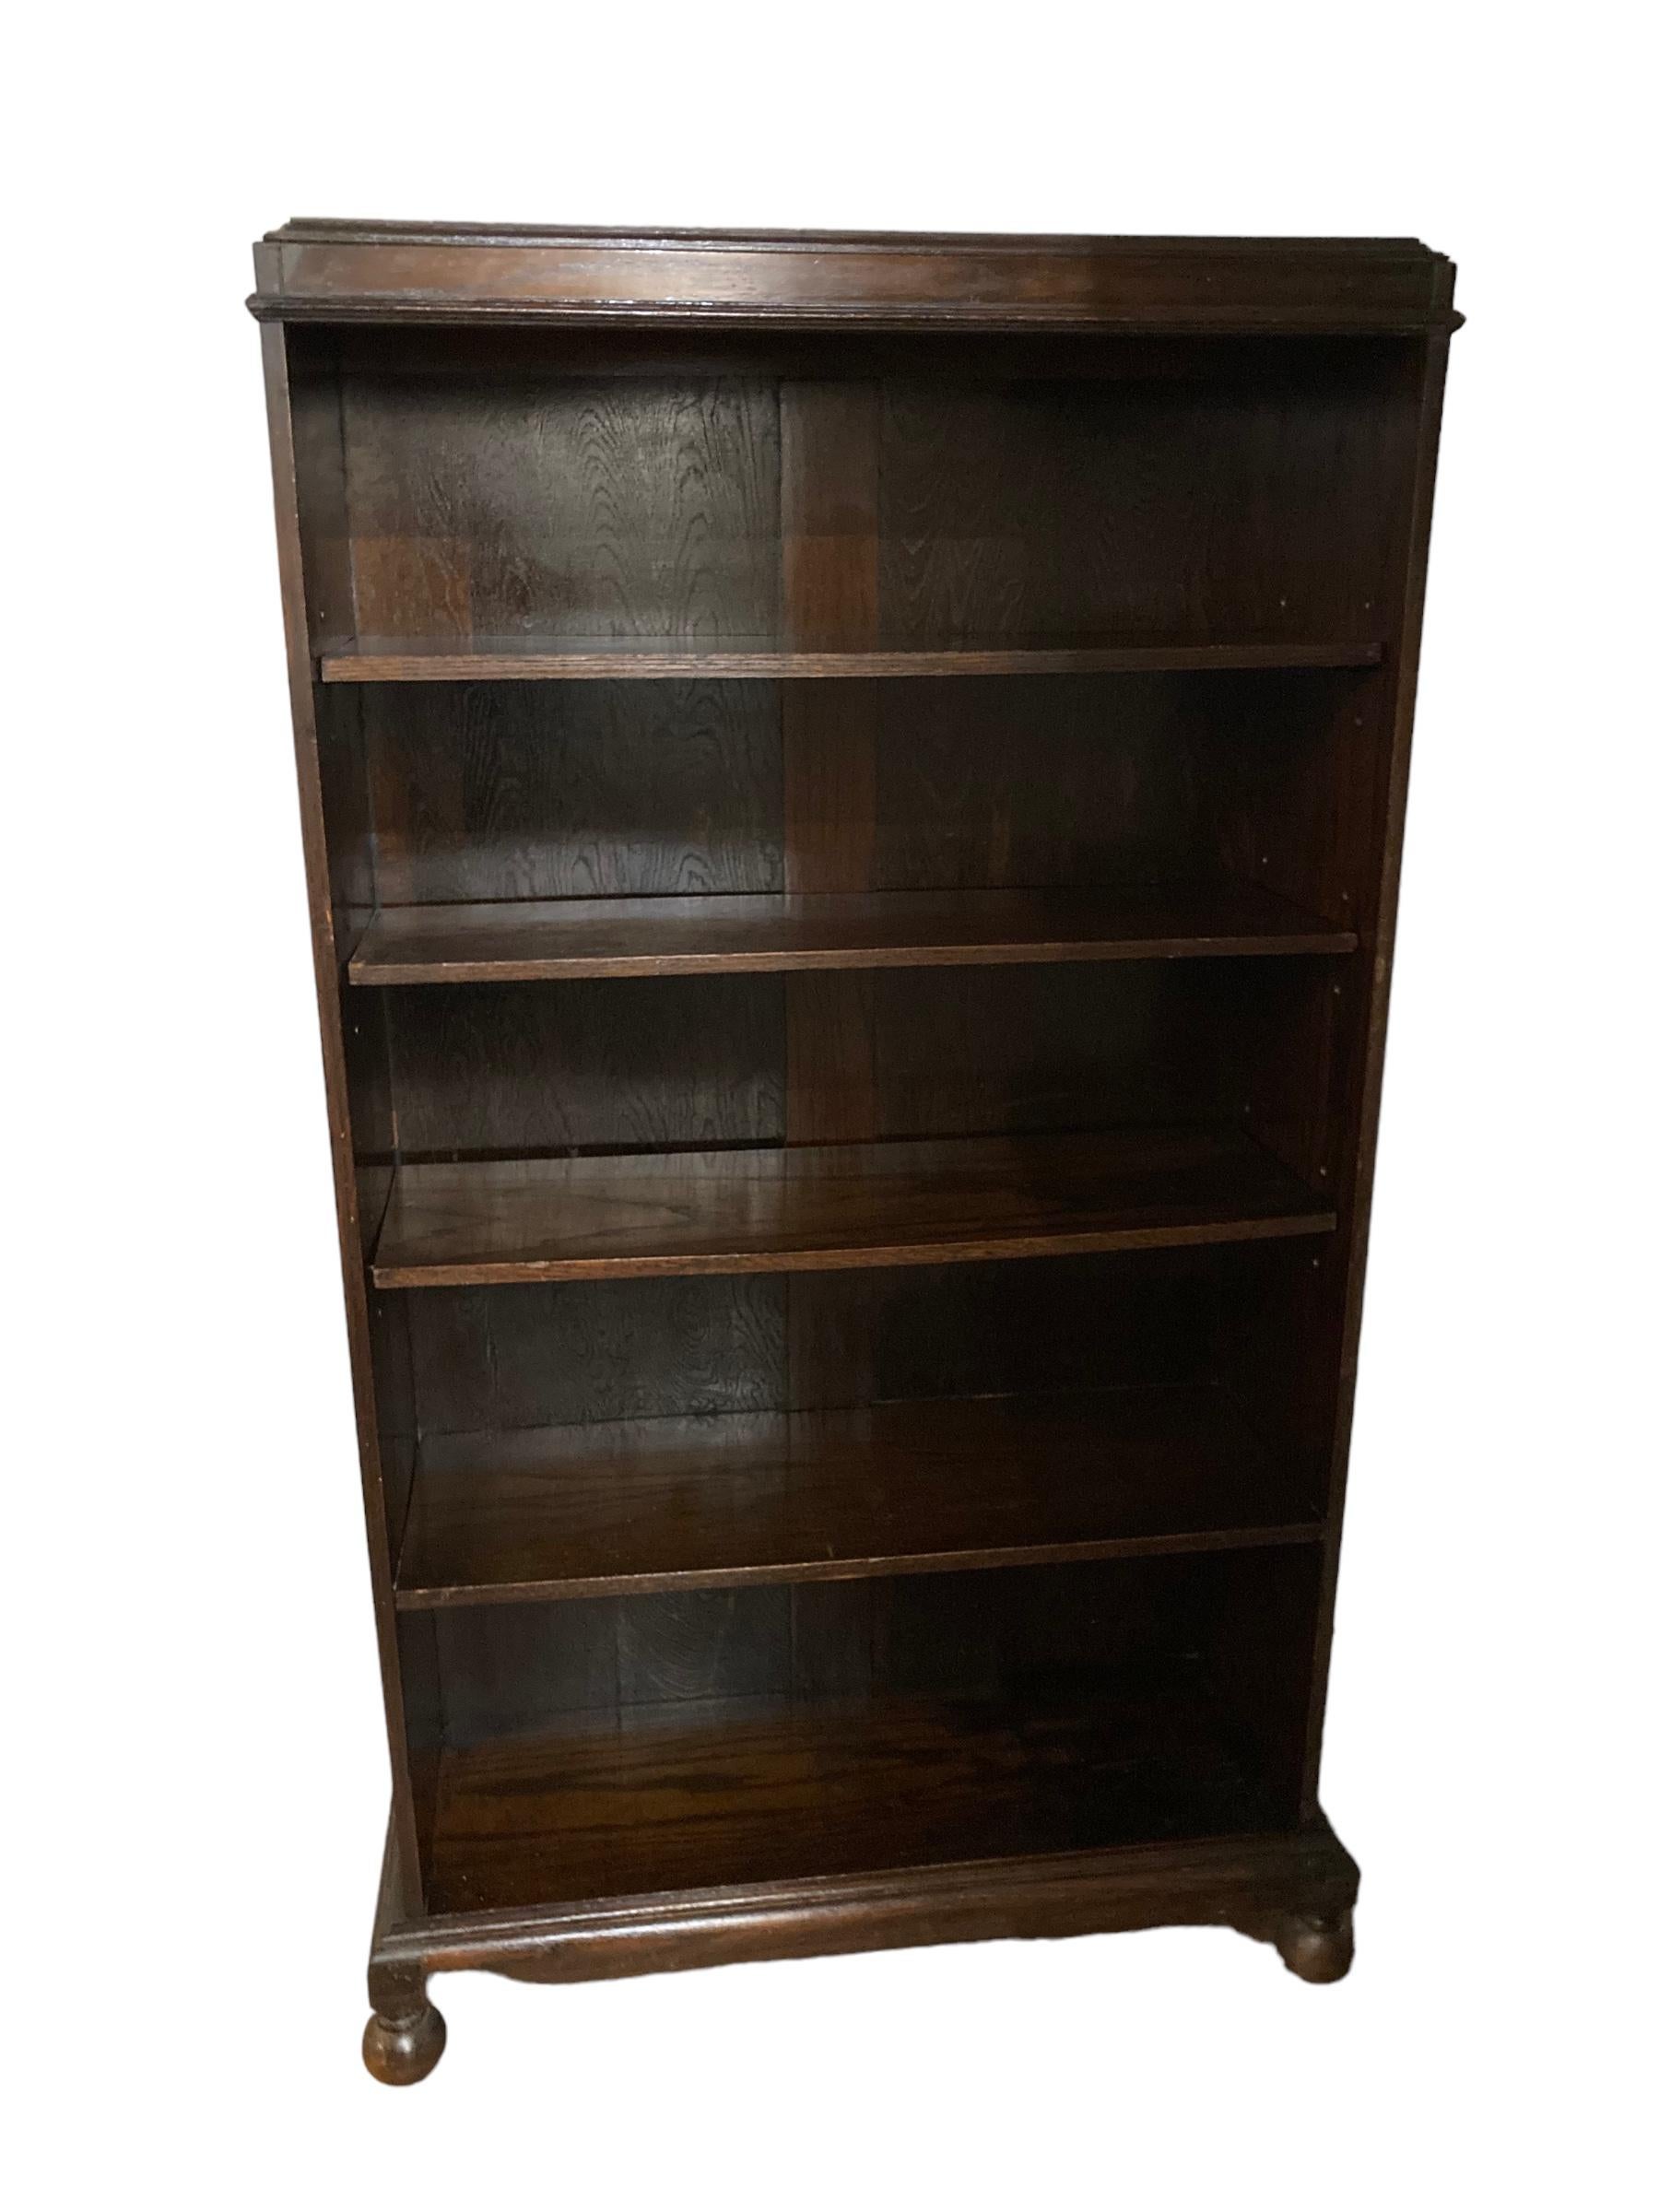 Early 1900's Victorian Dark Oak Bookcase, 4 shelves, 5 book compartments, bun feet to front. Fixed bottom shelf with 3 height adjustable shelves.

H: 140 cm

W: 78 cm

D: 27 cm

Bottom shelf height, fixed : 27cm

Further adjustable shelves 24cm or